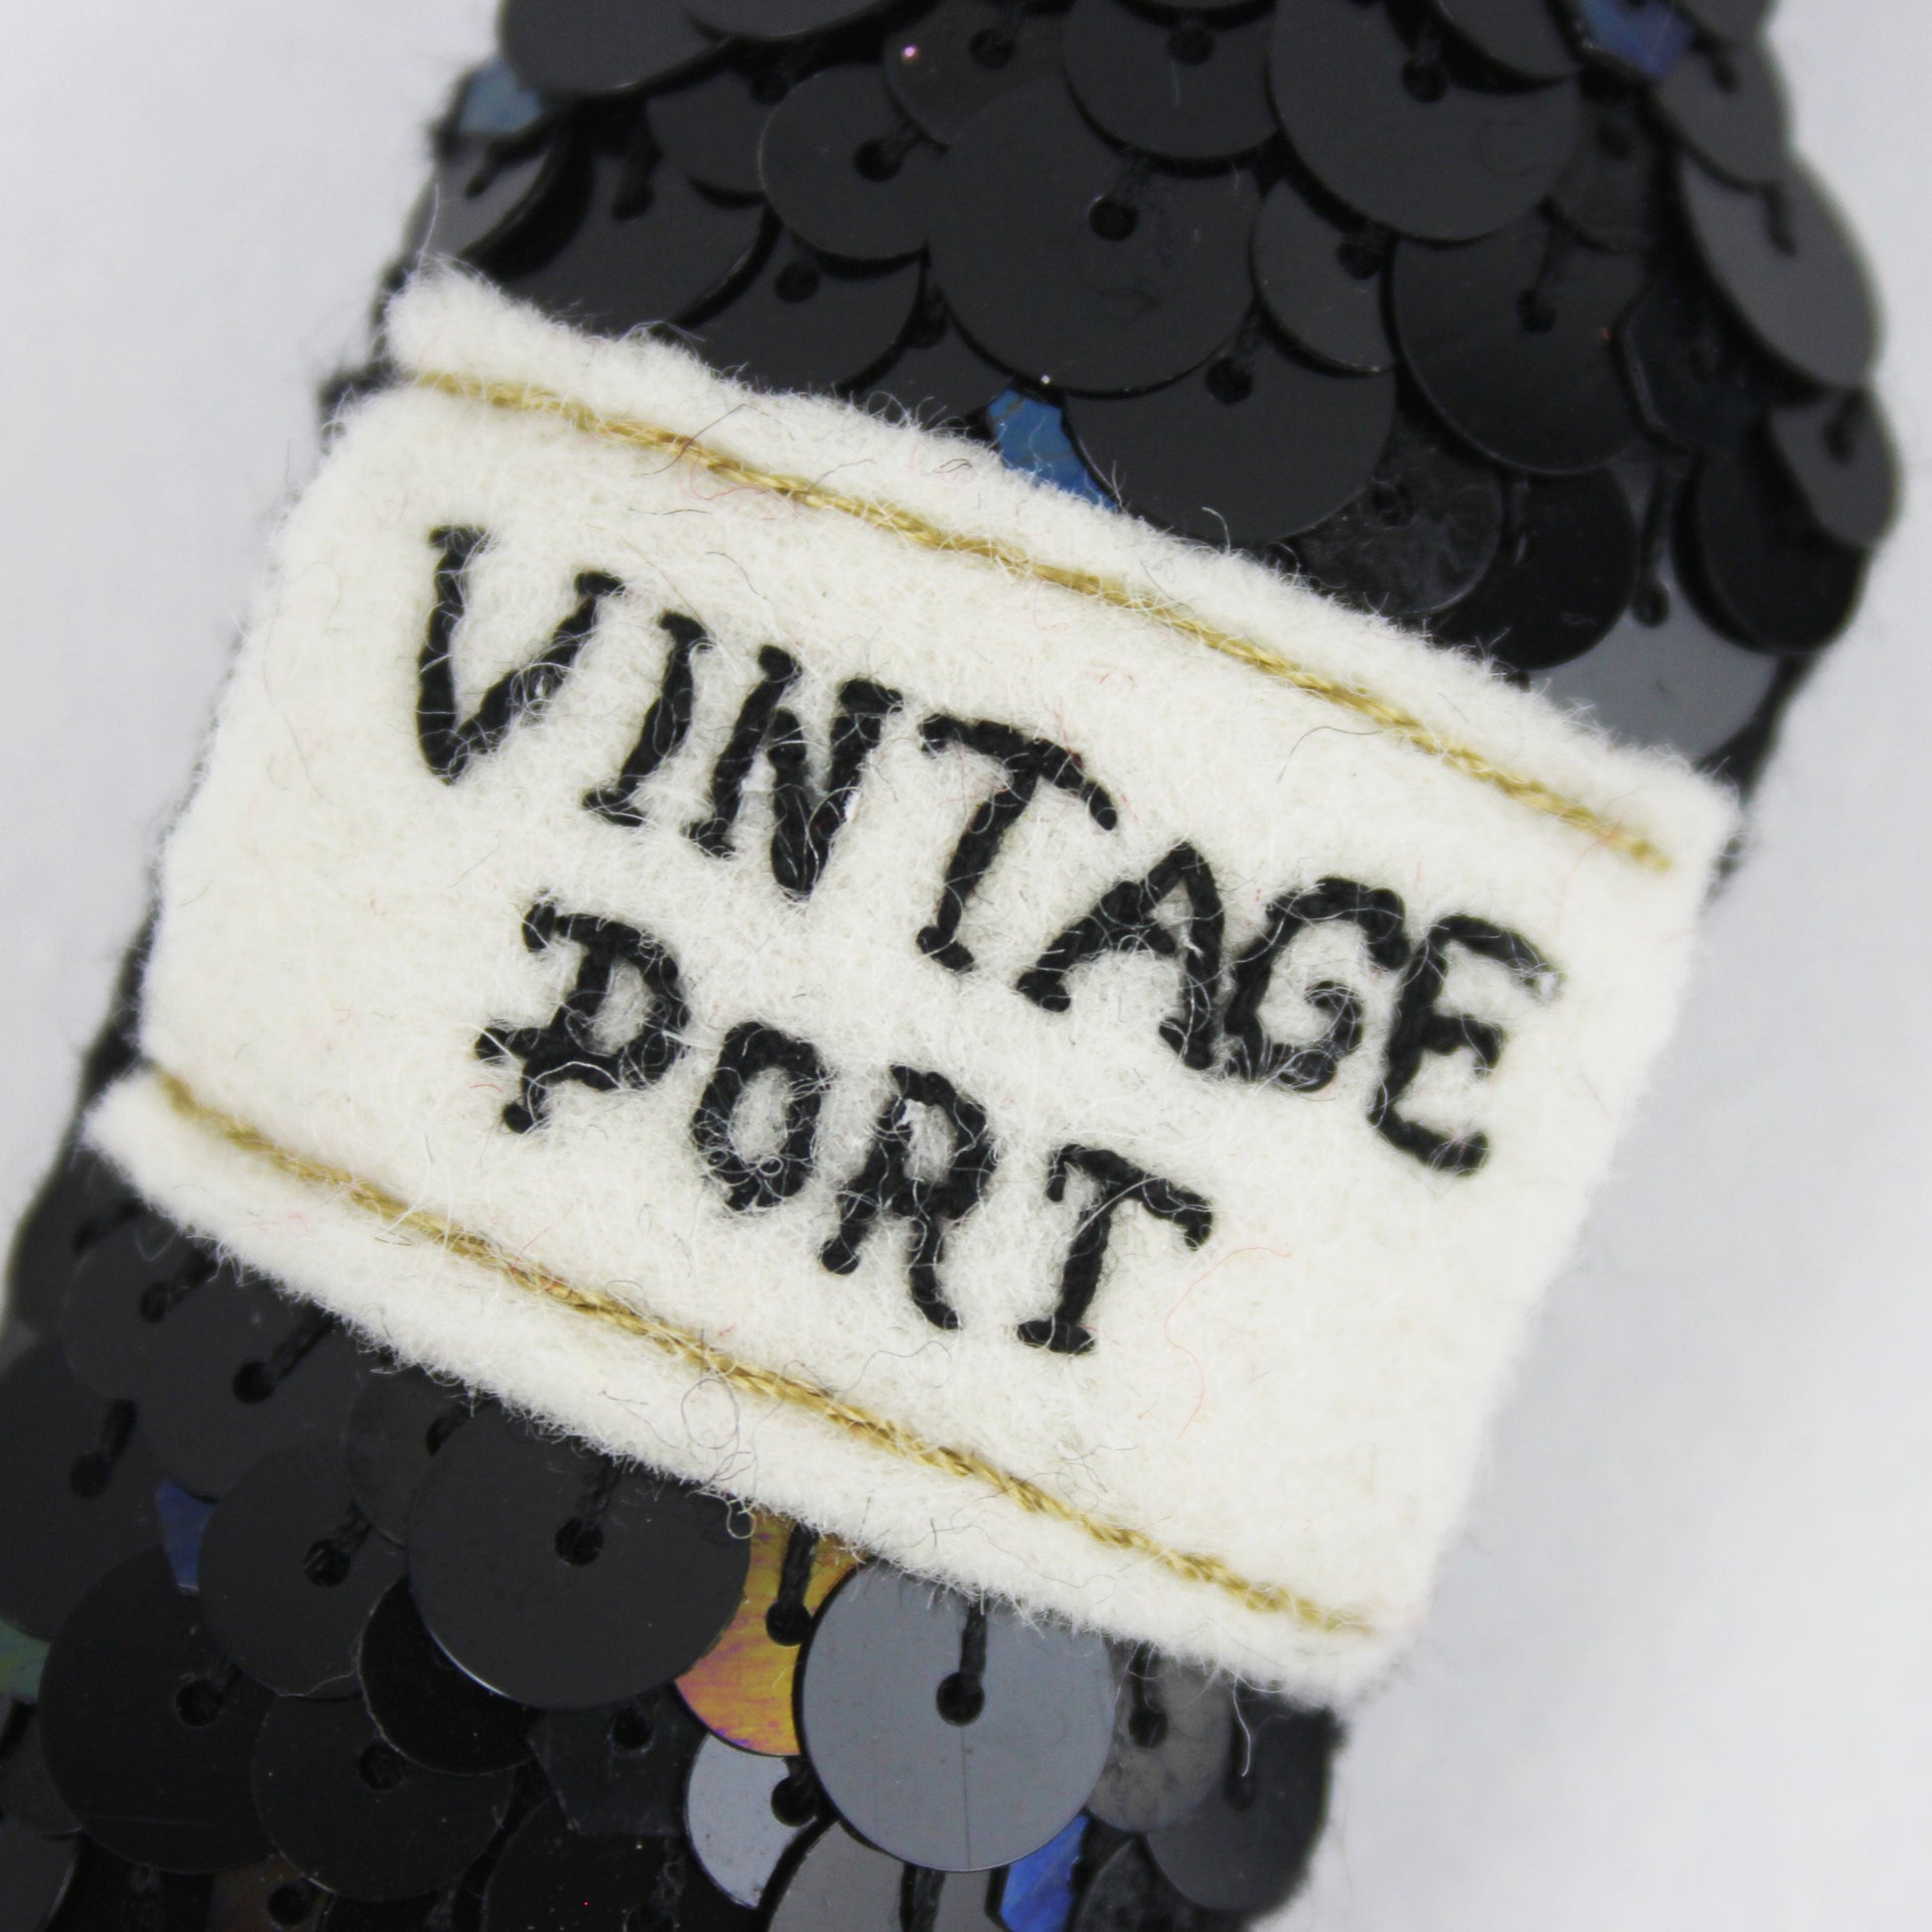 Vintage Port Hanging Ornament close up of the embroidered label